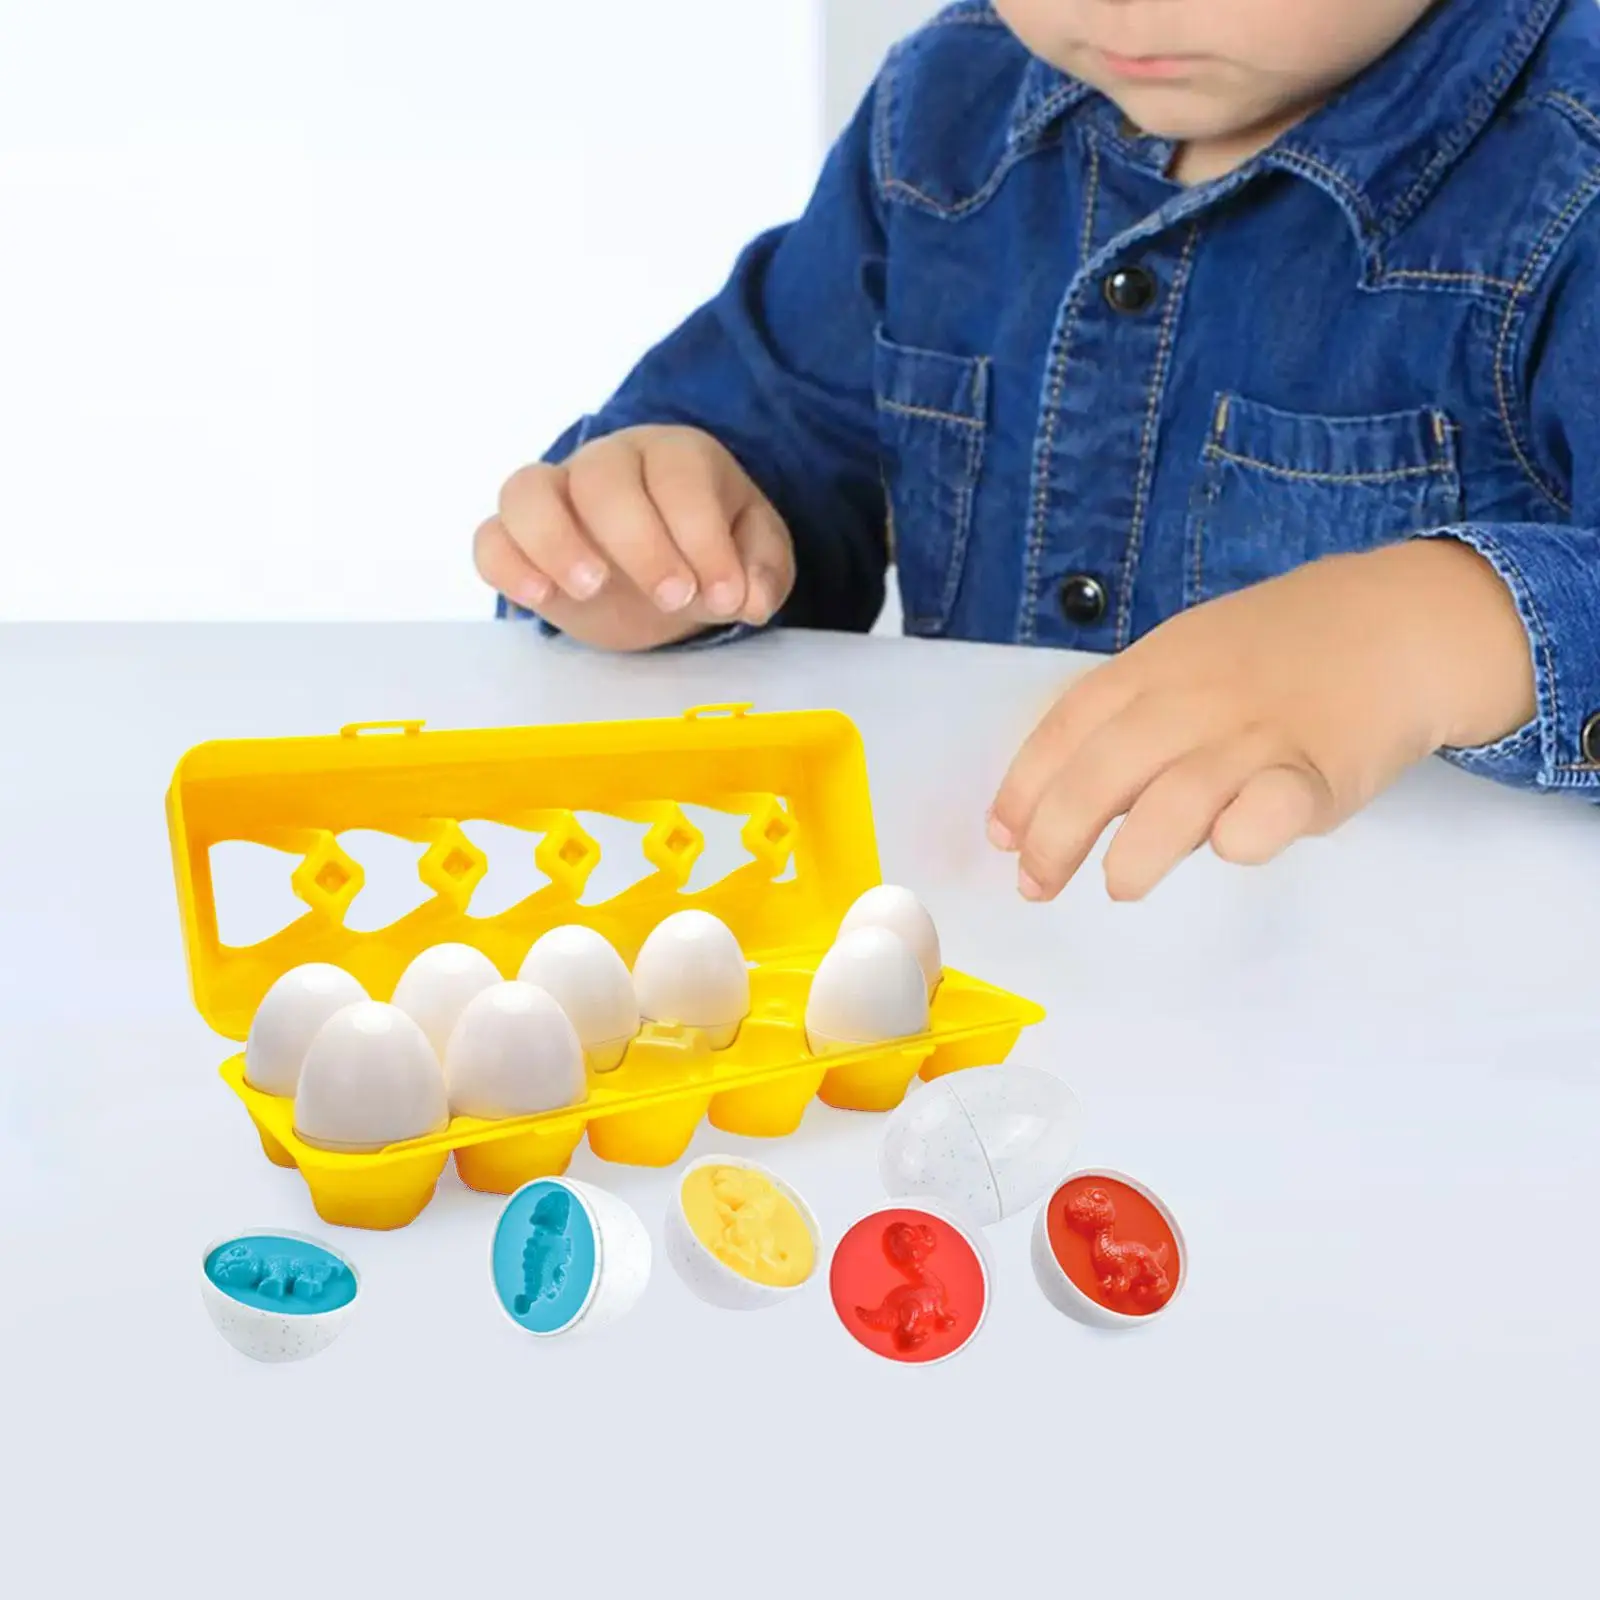 12x Matching and Sorting Egg Color and Shape Toy Matching Puzzle Eggs for Easter Basket Gift Kindergarten 3 4 5 6 Years Old